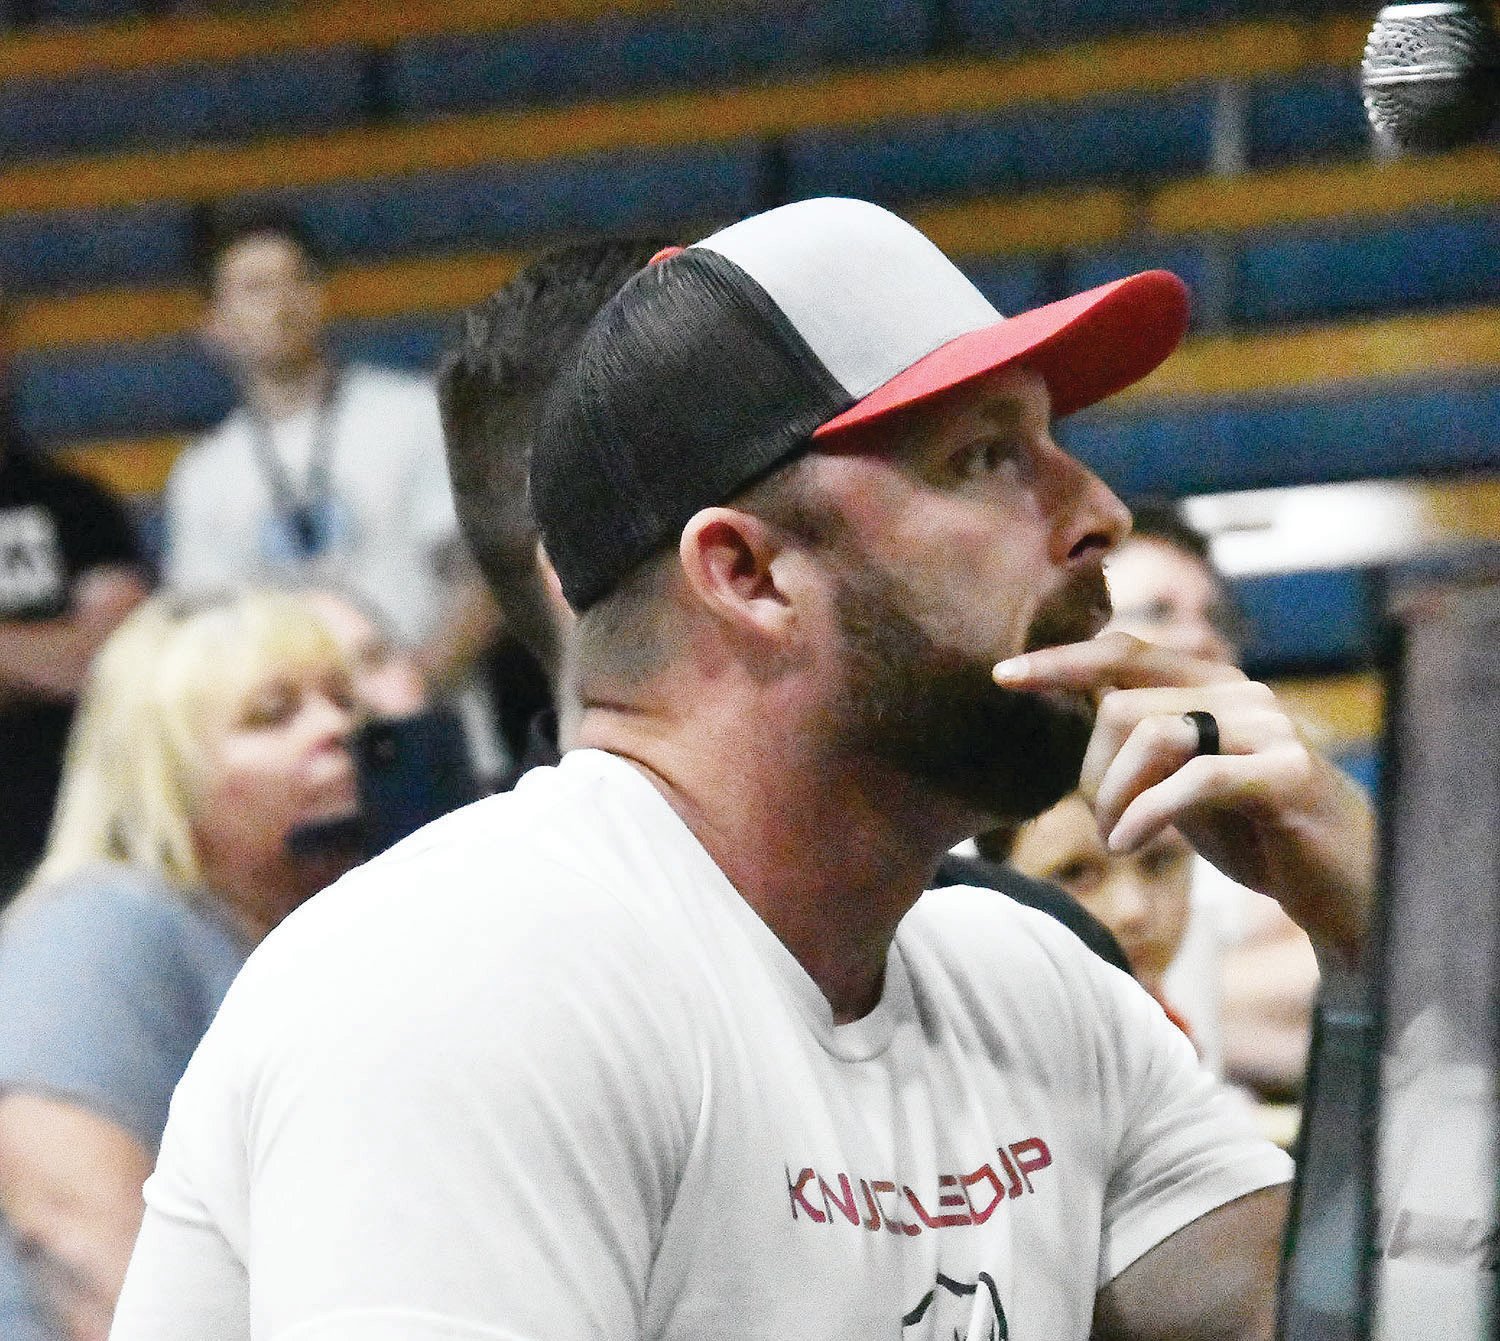 Promoter Ricky Davidson observes one of the fights next to the cage. Several local mixed martial artists and kickboxers showcased their wares during Fight Show X on Saturday, Sept. 24.